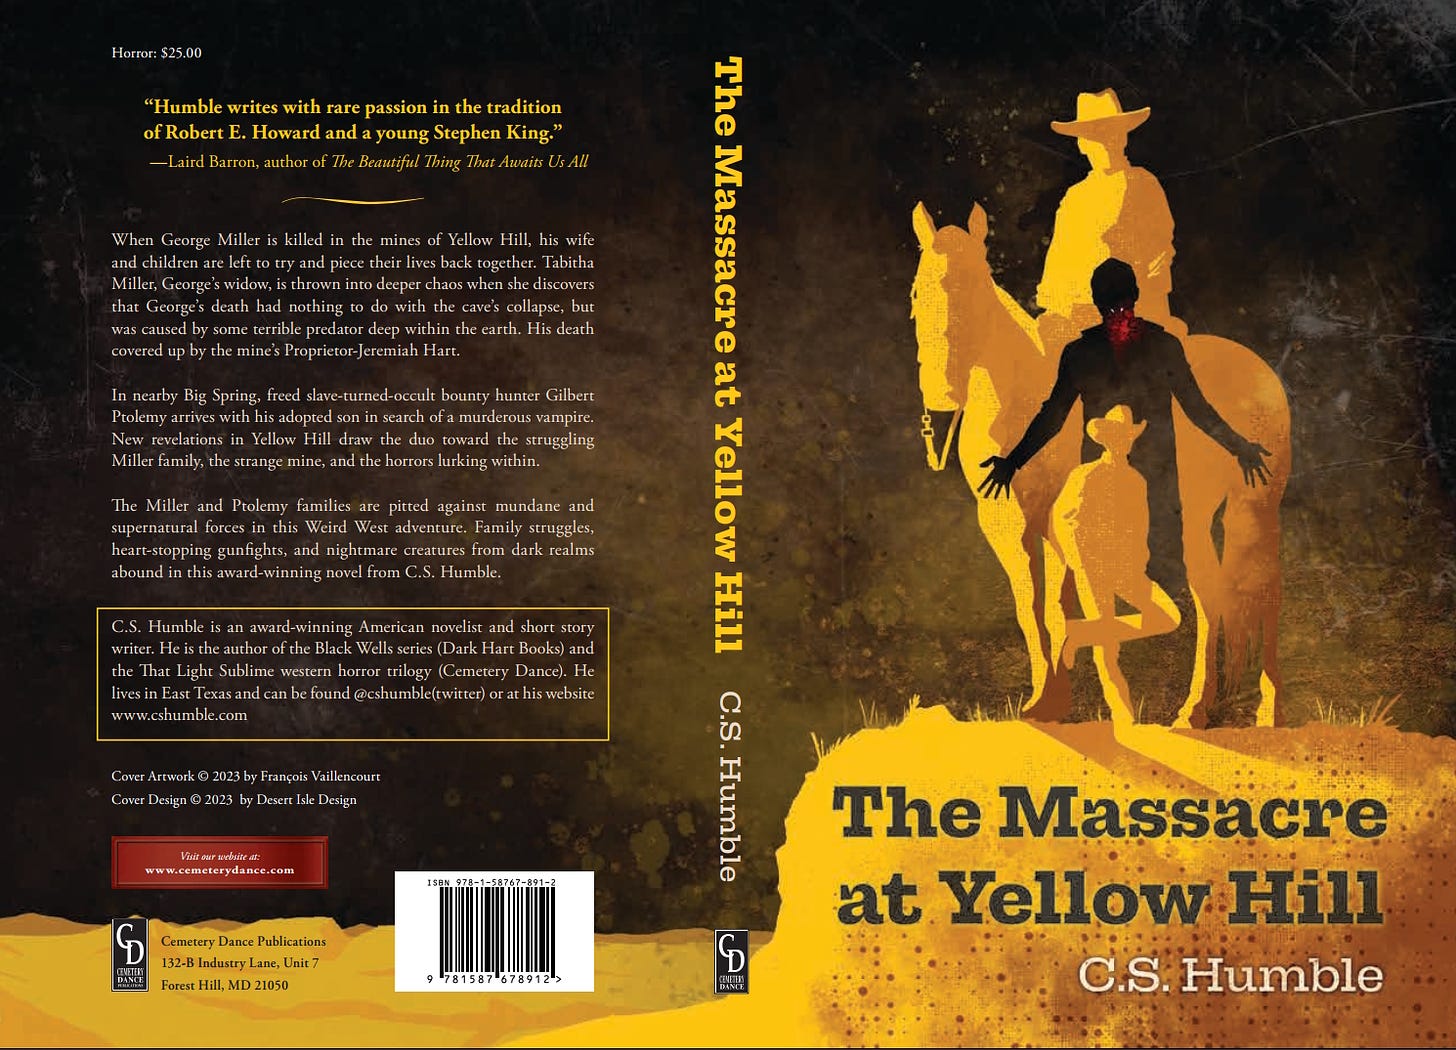 Cemetery Dance Ebooks & Paperbacks on Twitter: "#CoverReveal - THE MASSACRE  AT YELLOW HILL, by @CSHumble! “Humble writes with rare passion in the  tradition of Robert E. Howard and a young Stephen